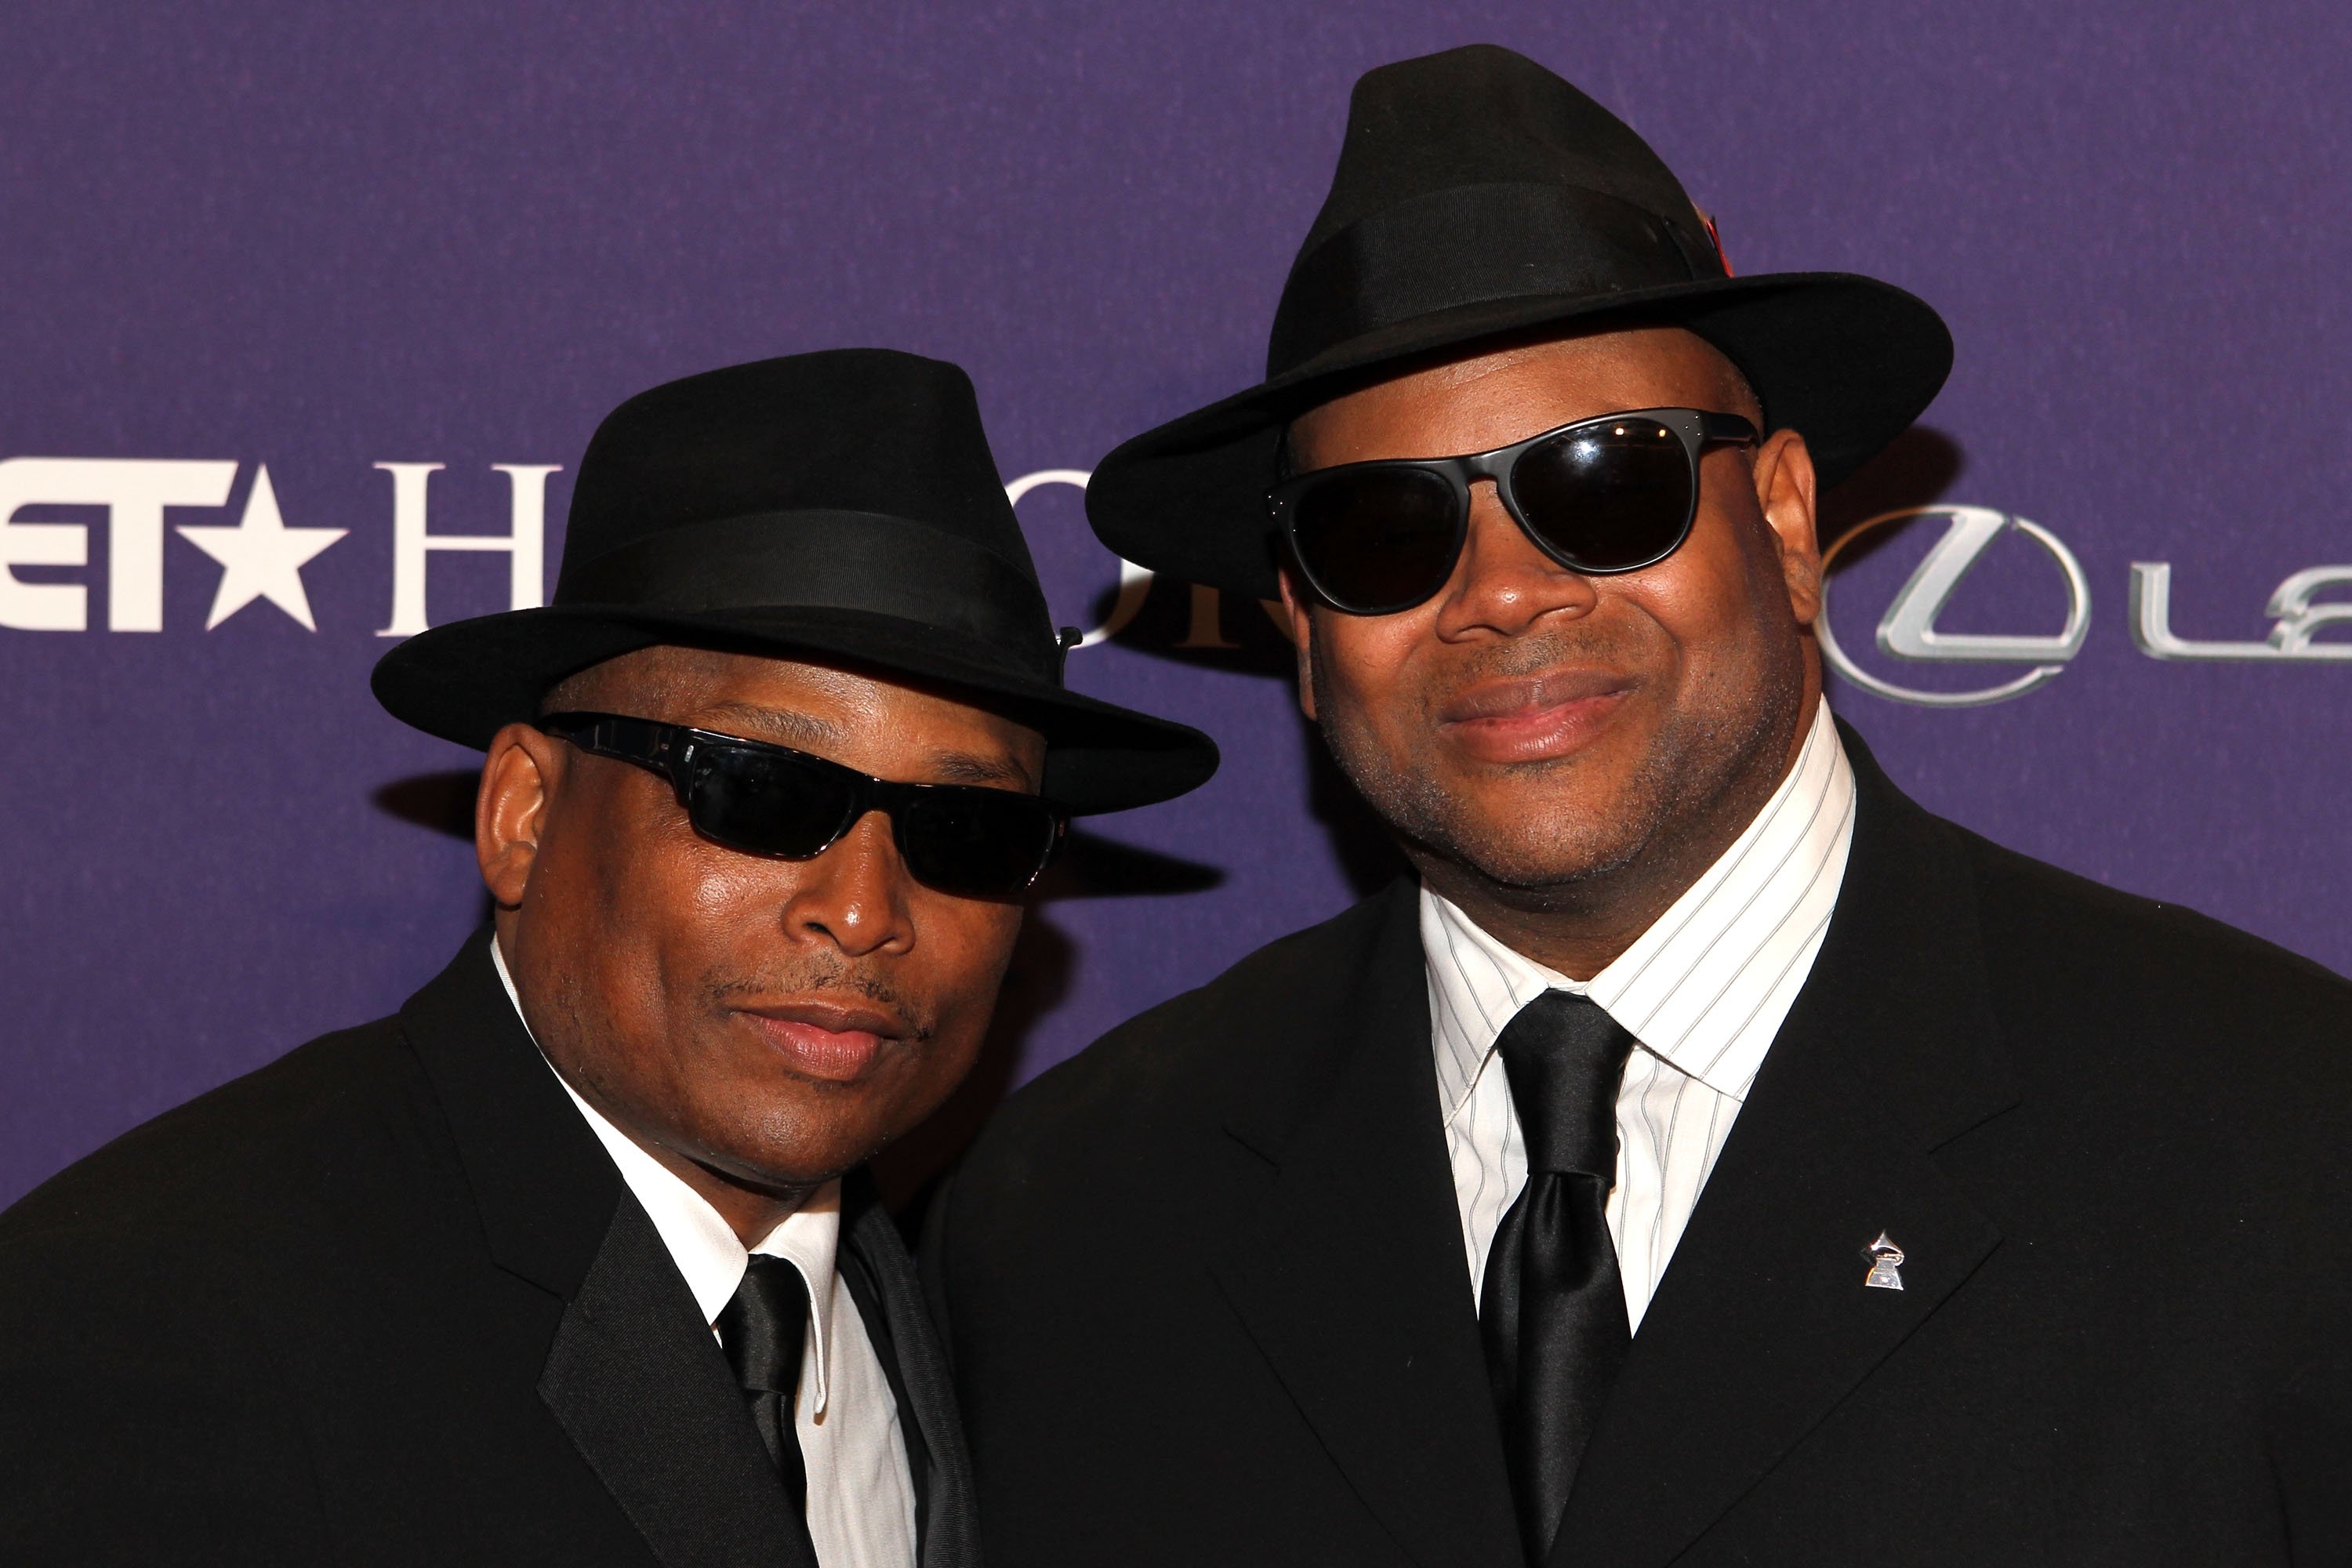 Terry Lewis and Jimmy Jam attend BET Honors 2013: Red Carpet Presented By Pantene at Warner Theatre on January 12, 2013 | Photo: GettyImages